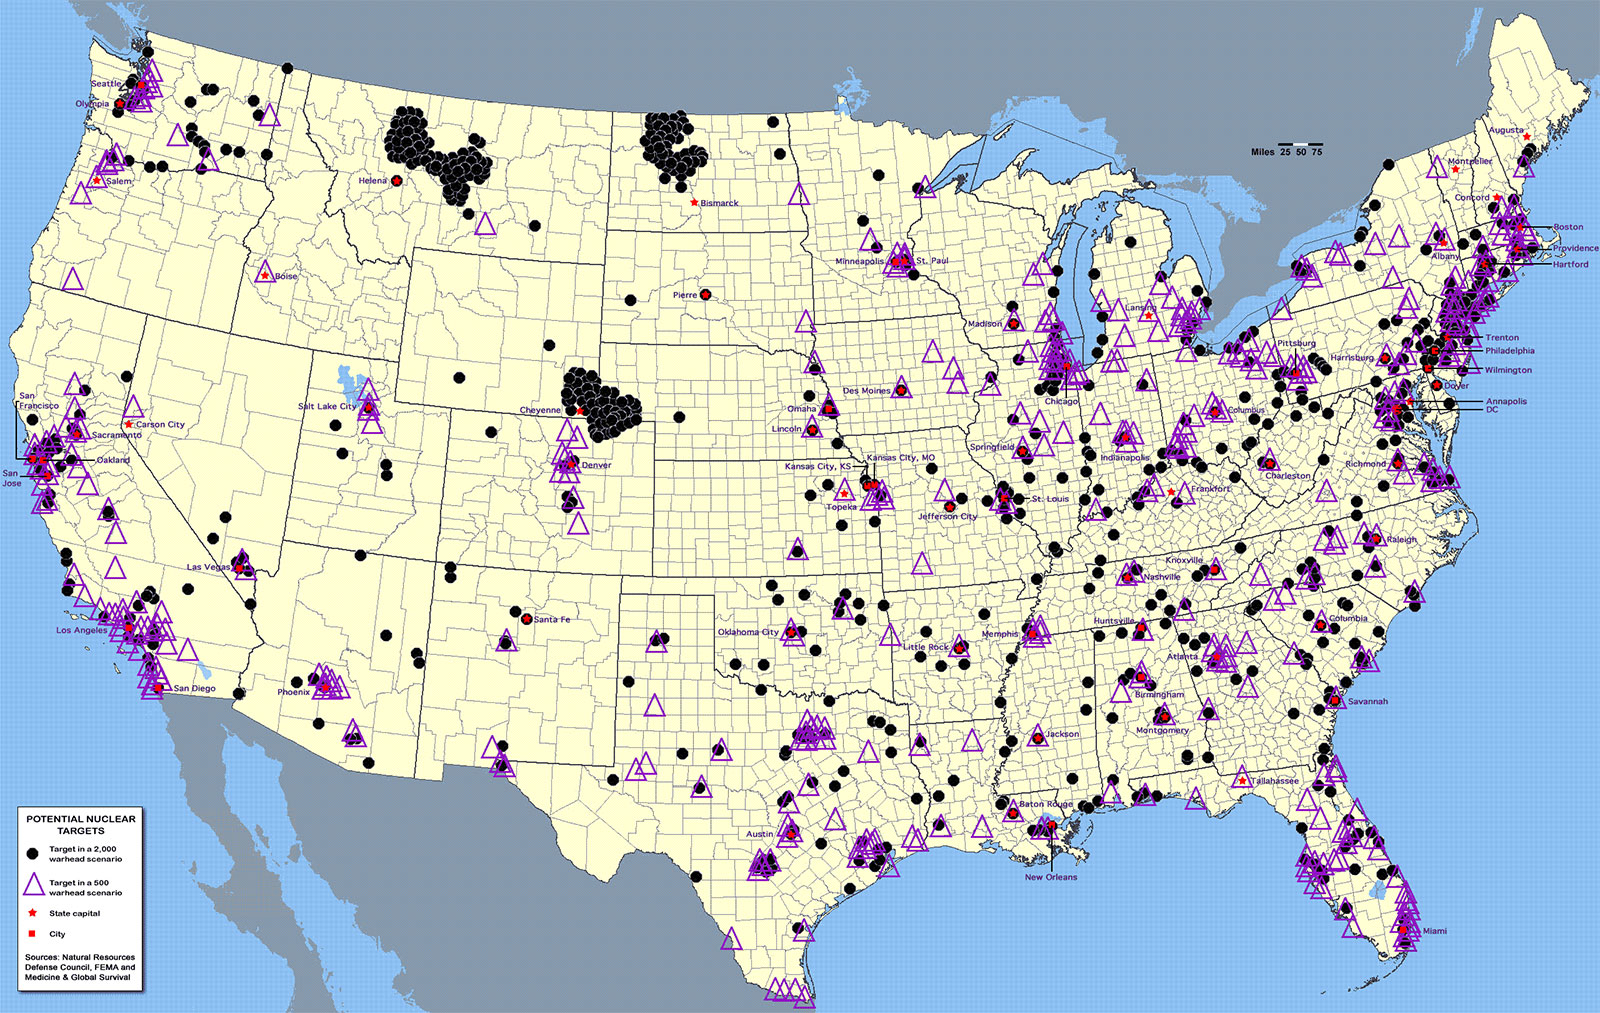 A map of the potential targets for nuclear strikes on the US